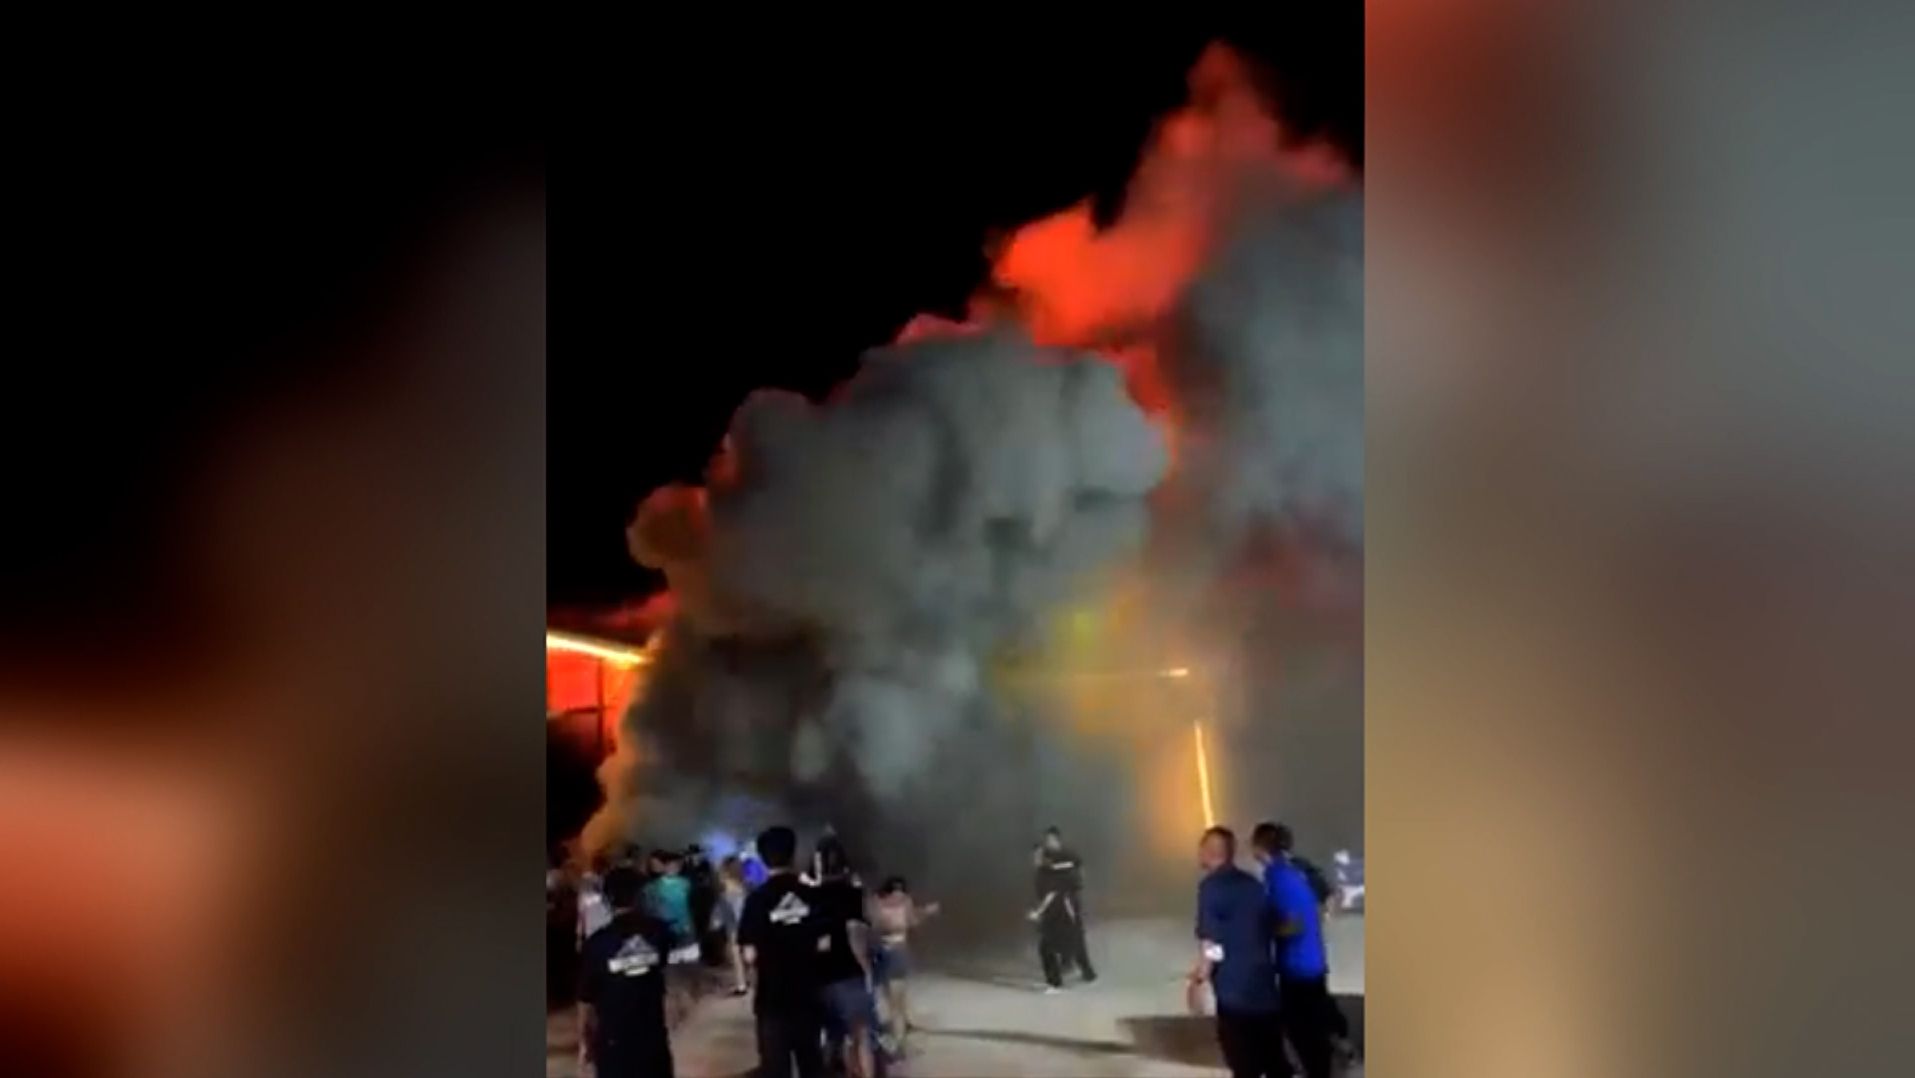 A deadly fire broke out in the early hours of Friday at a nightclub in Thailand.